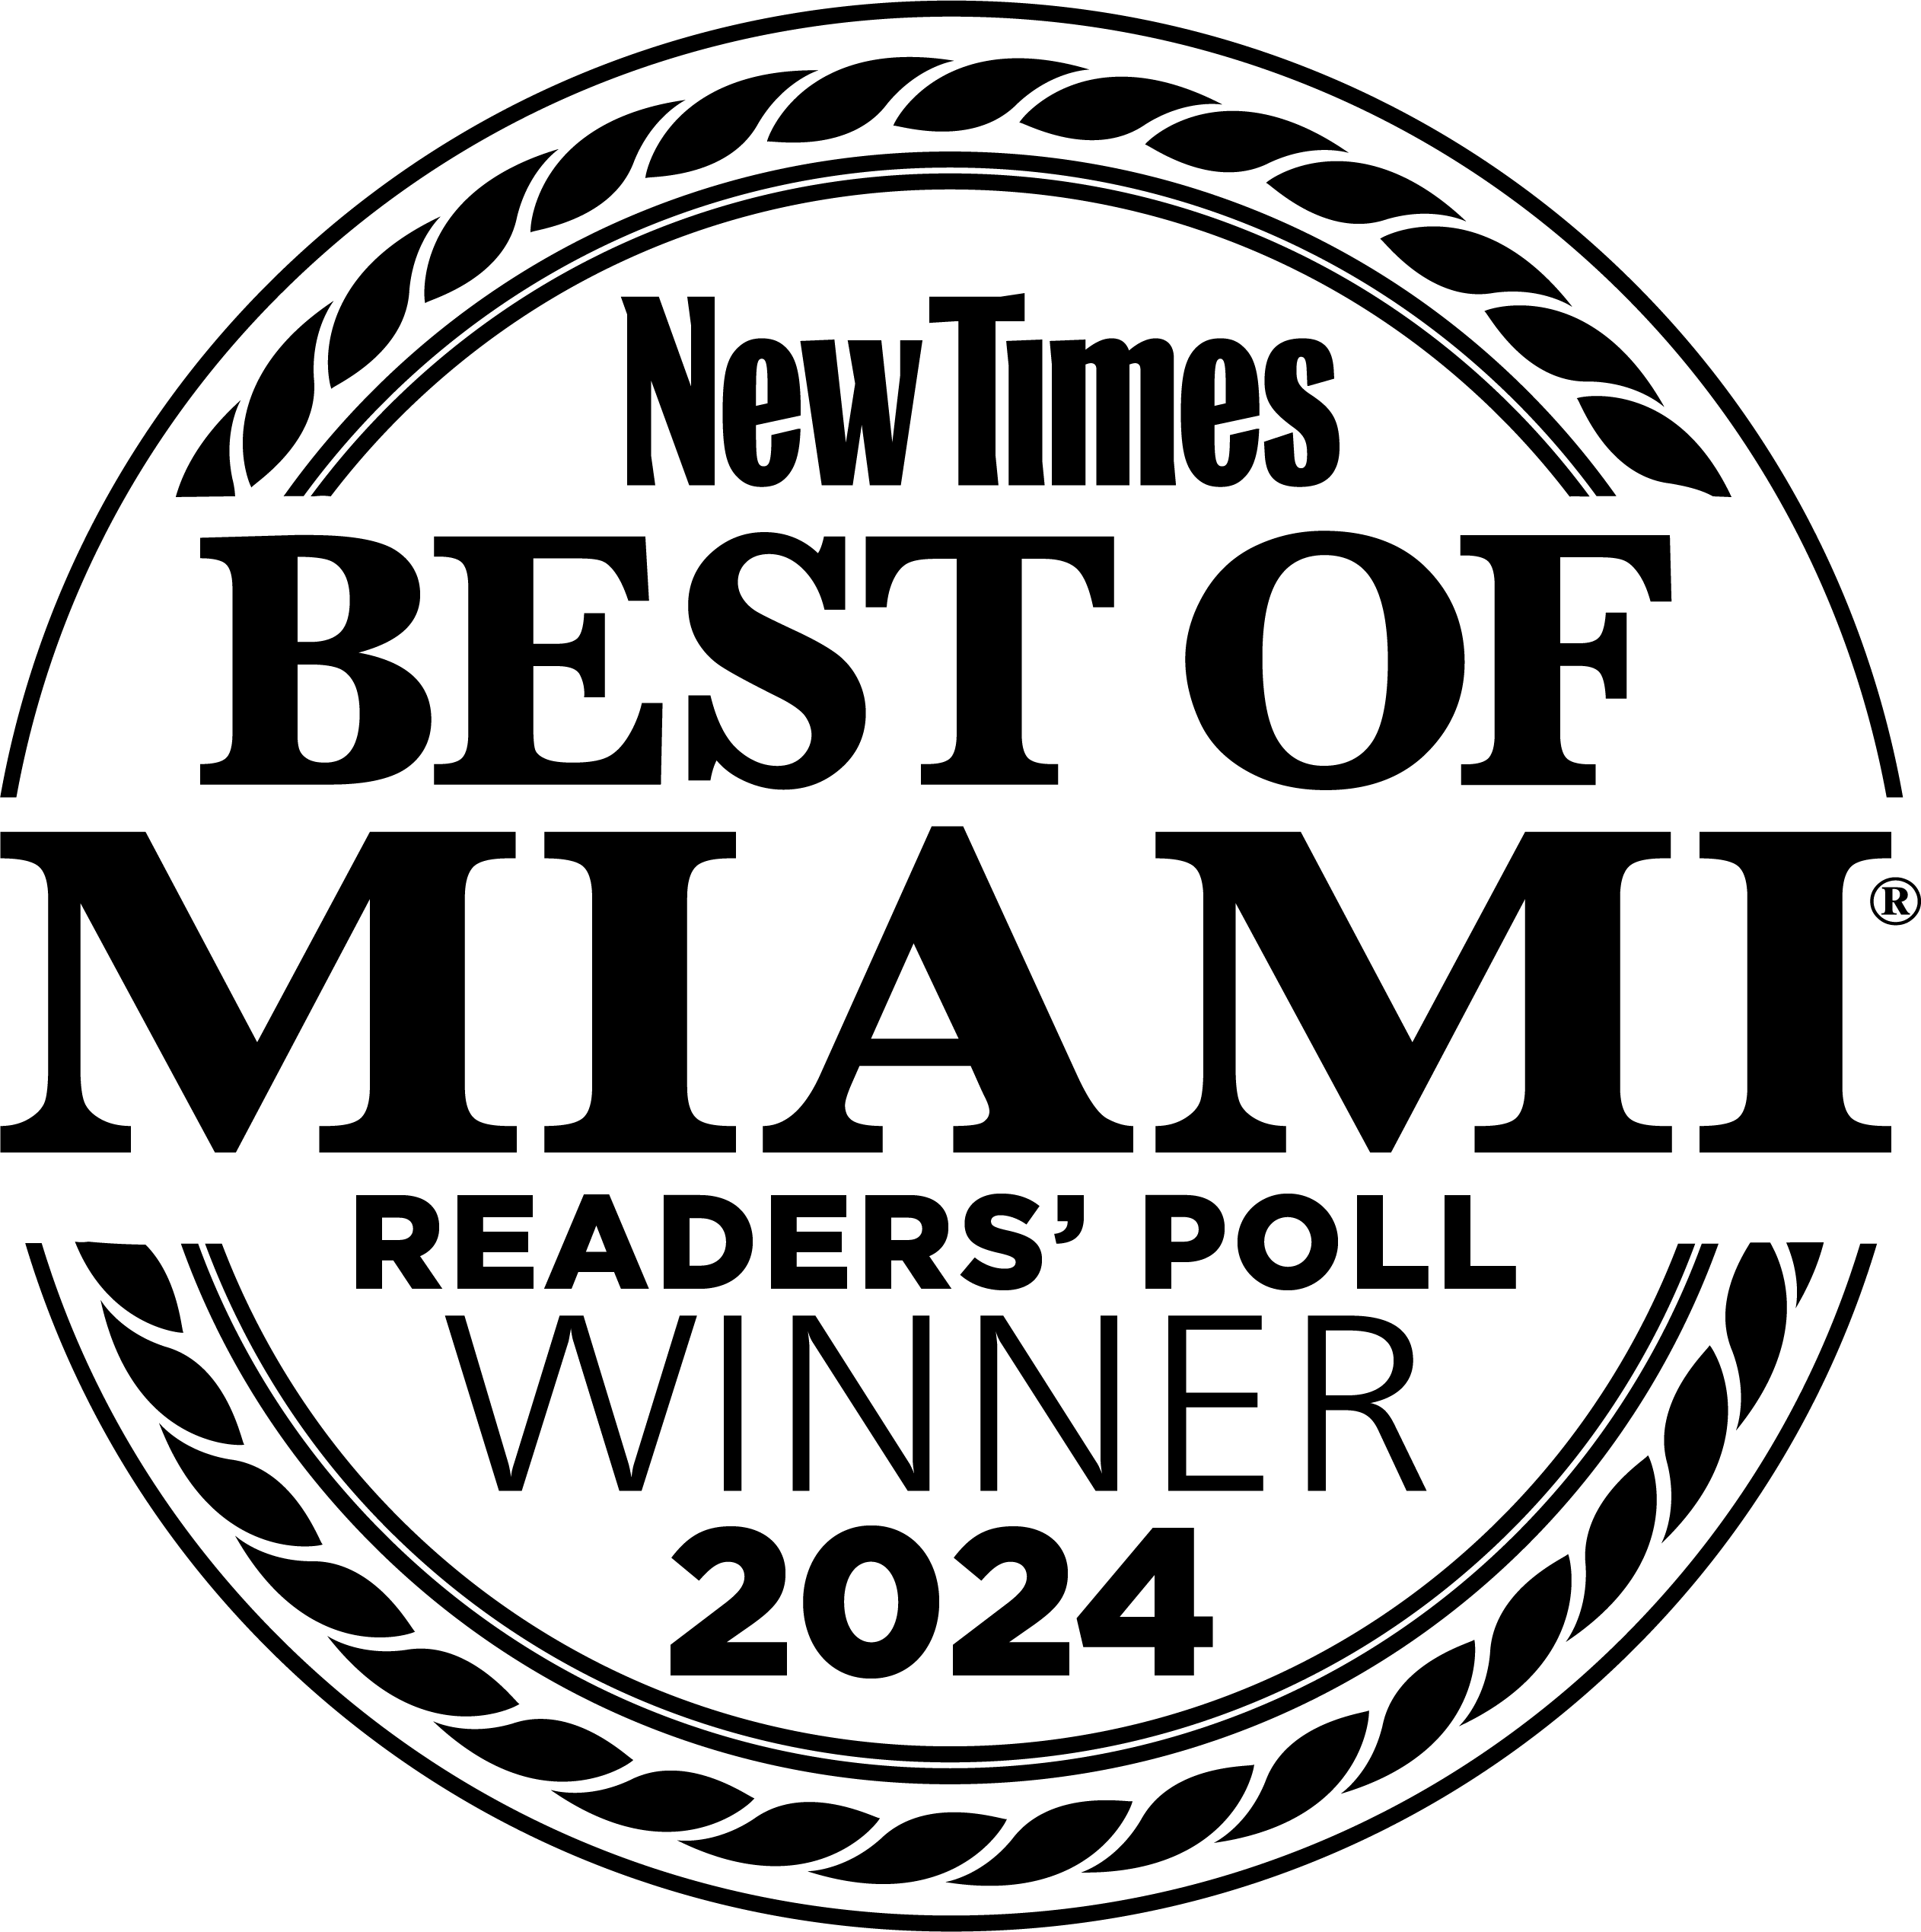 Miami New Times Best of 2023